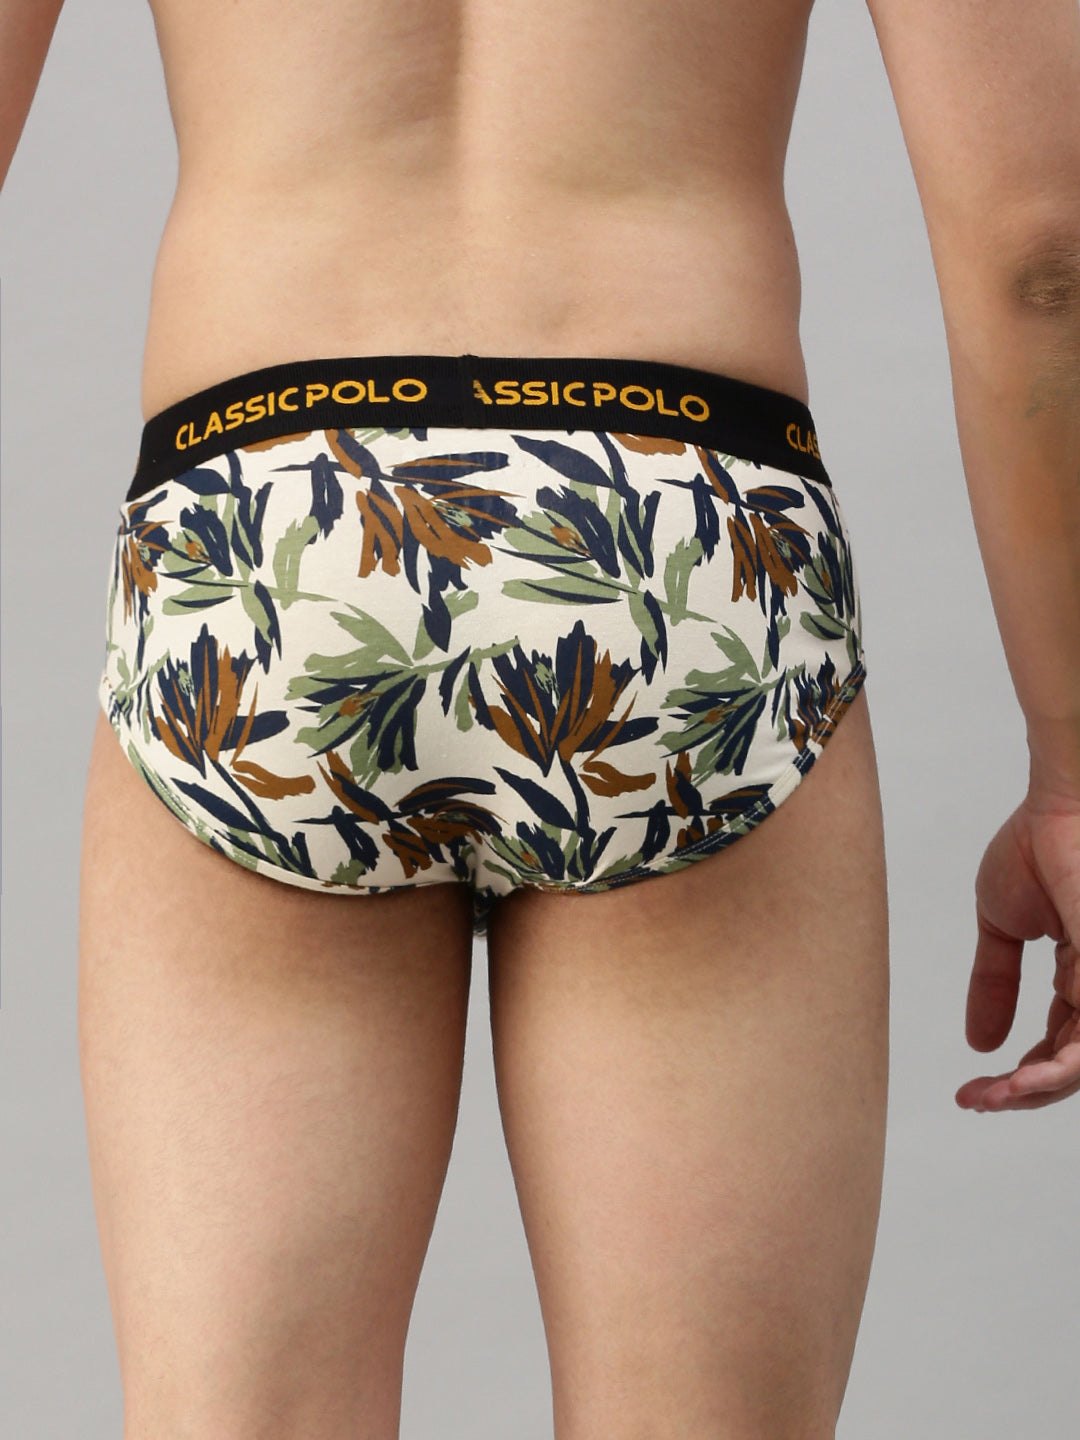 Classic Polo Men's Modal Printed Briefs | Scarce - Red & Yellow (Pack of 2)